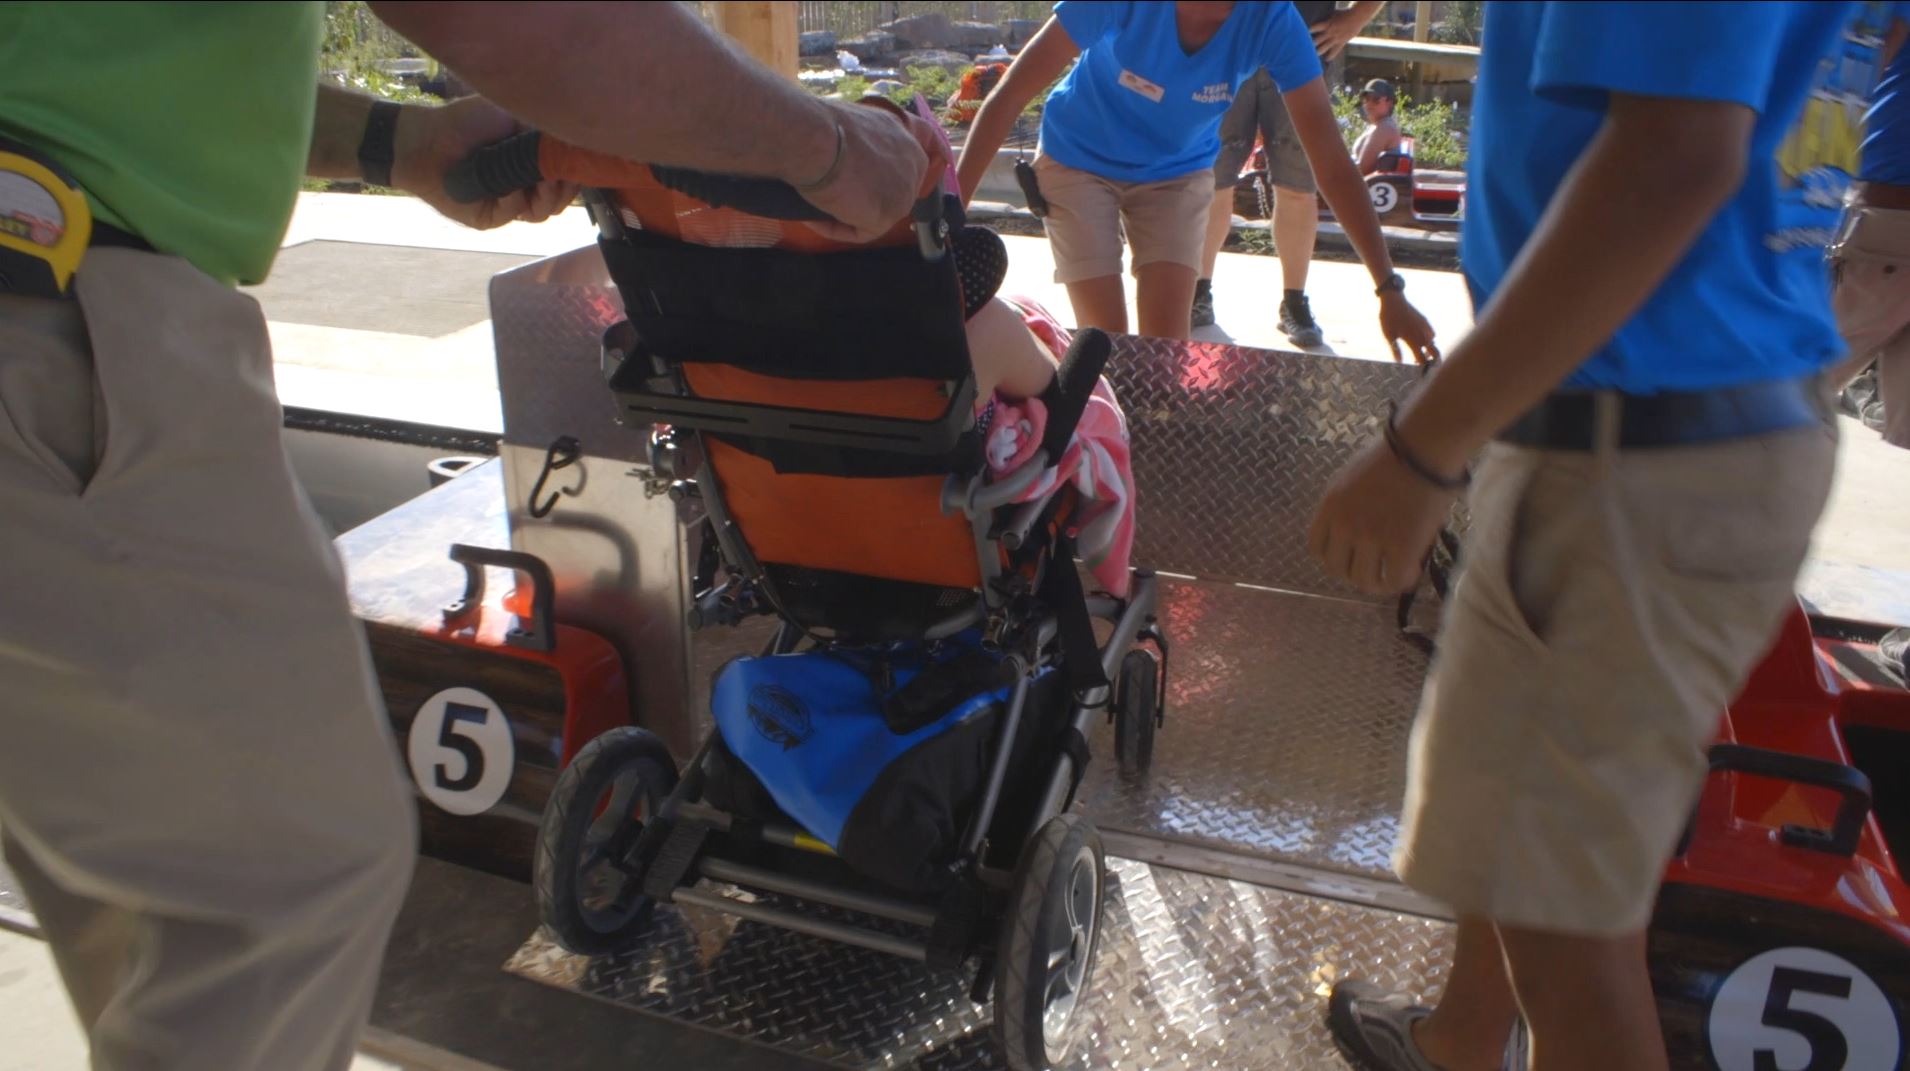 Loading wheelchair onto water ride